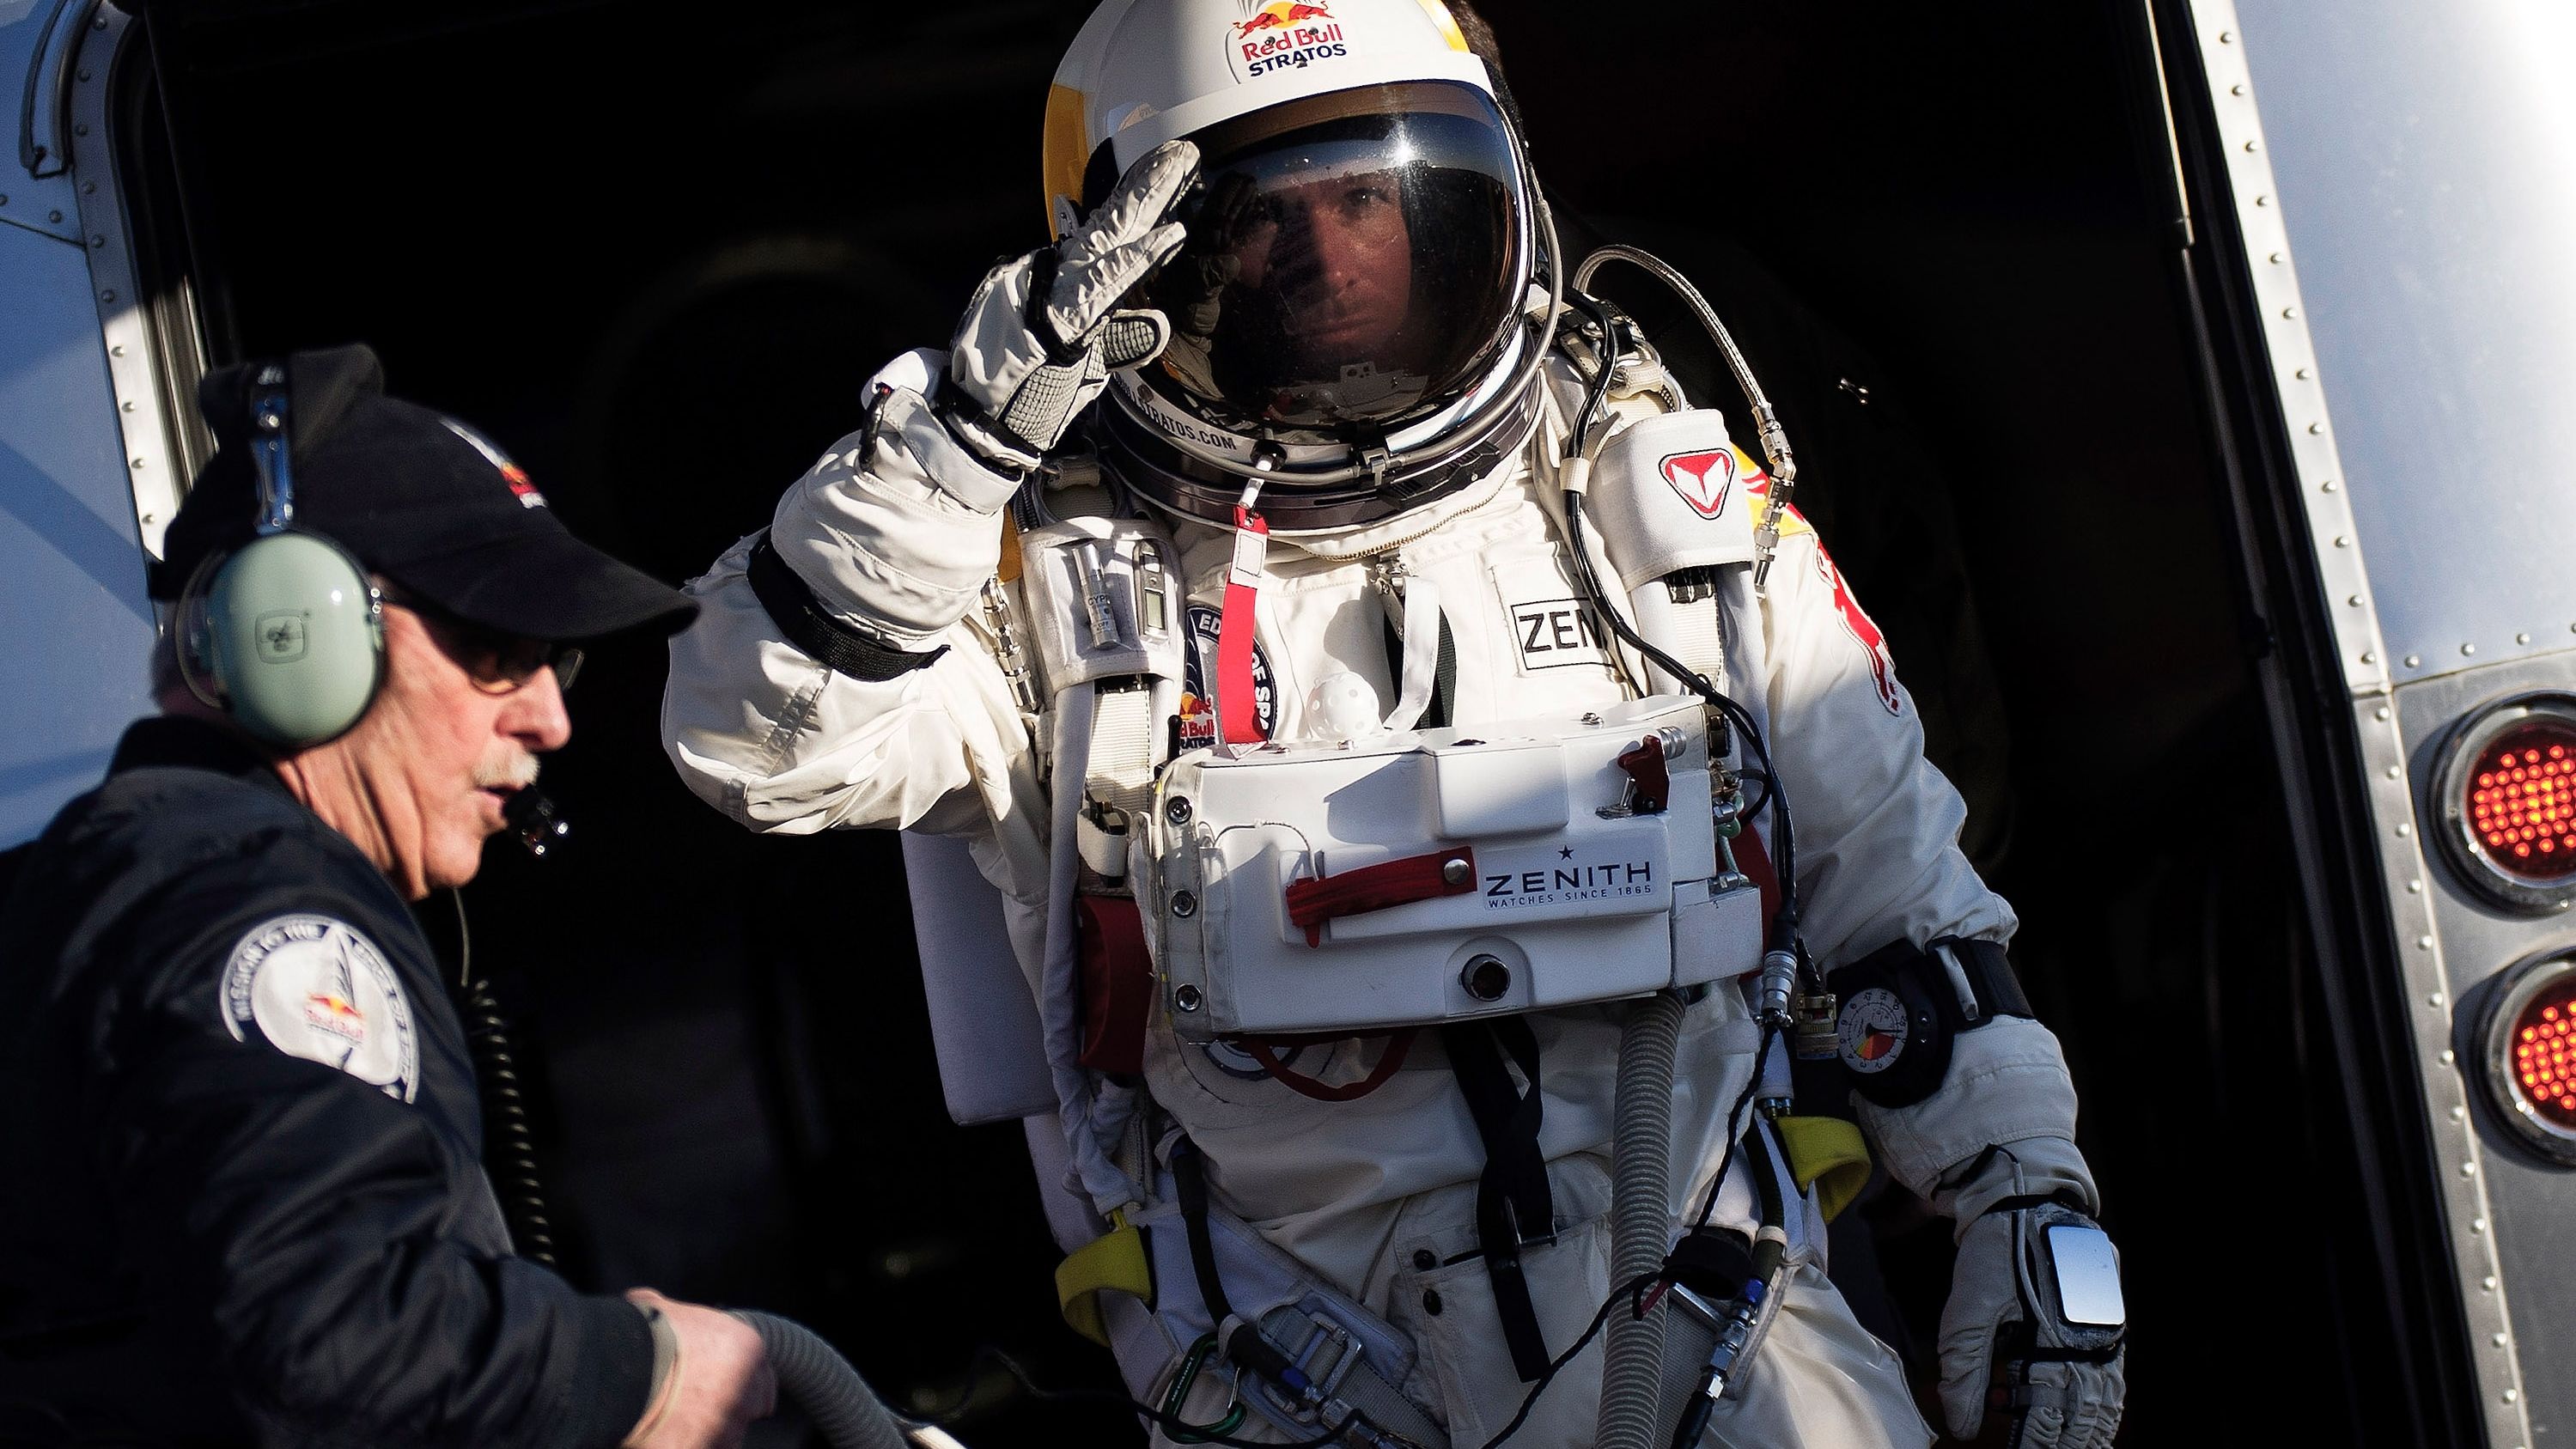 Baumgartner's suit took him months to get used to wearing.